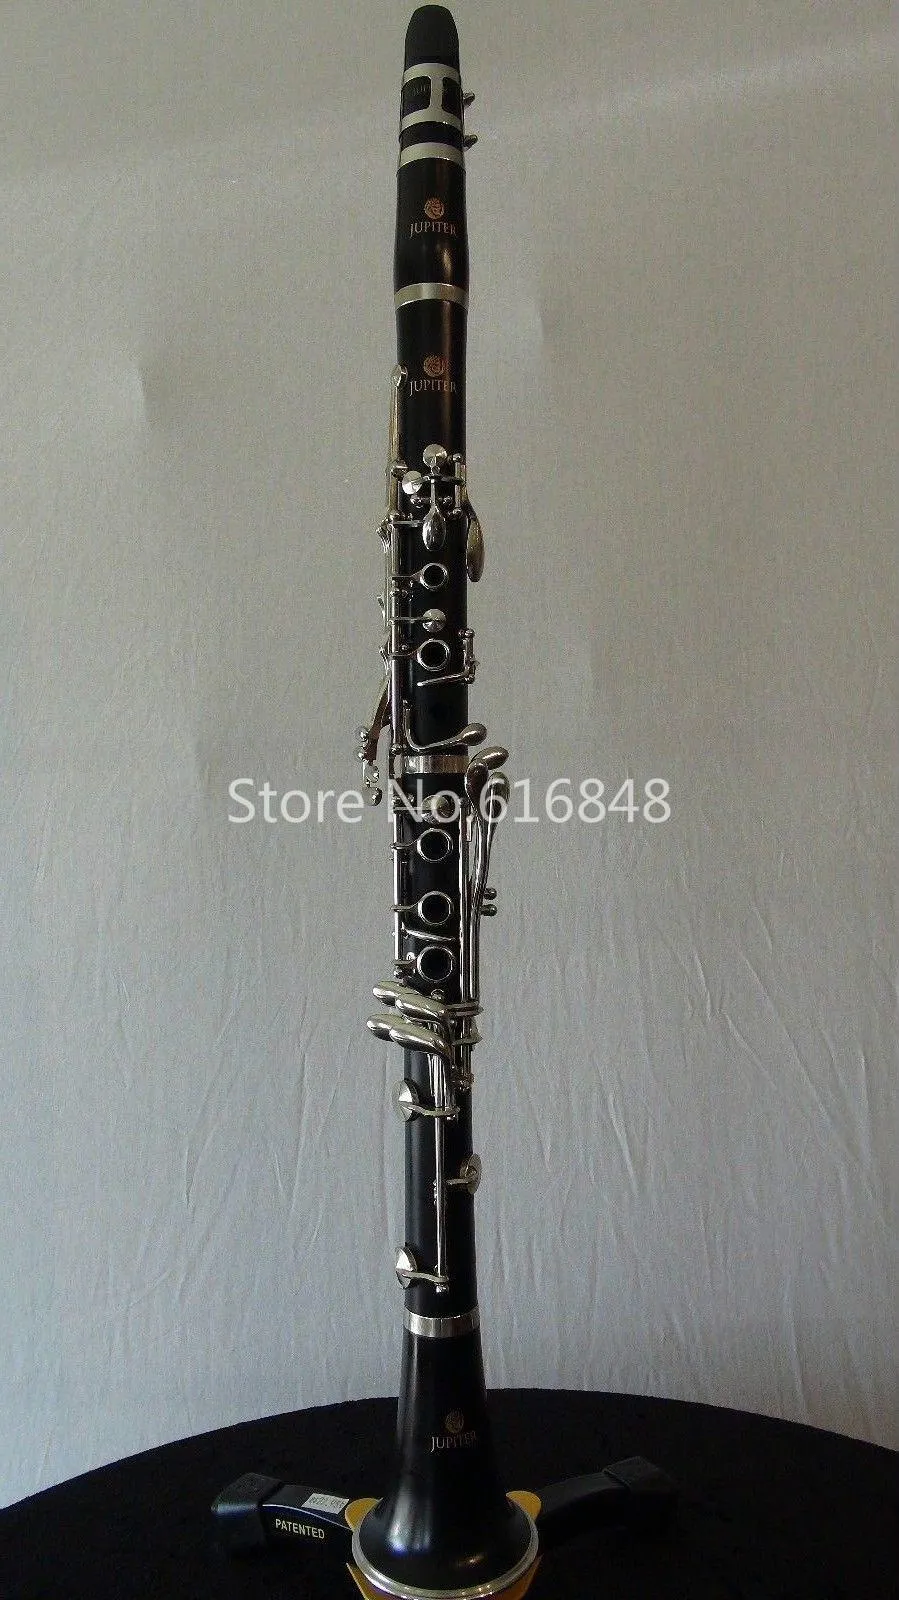 JUPITER JCL-737 Professional B-flat Tune Instruments Bb Clarinet High Quality Brand Black Tube With Mouthpiece Case Accessories